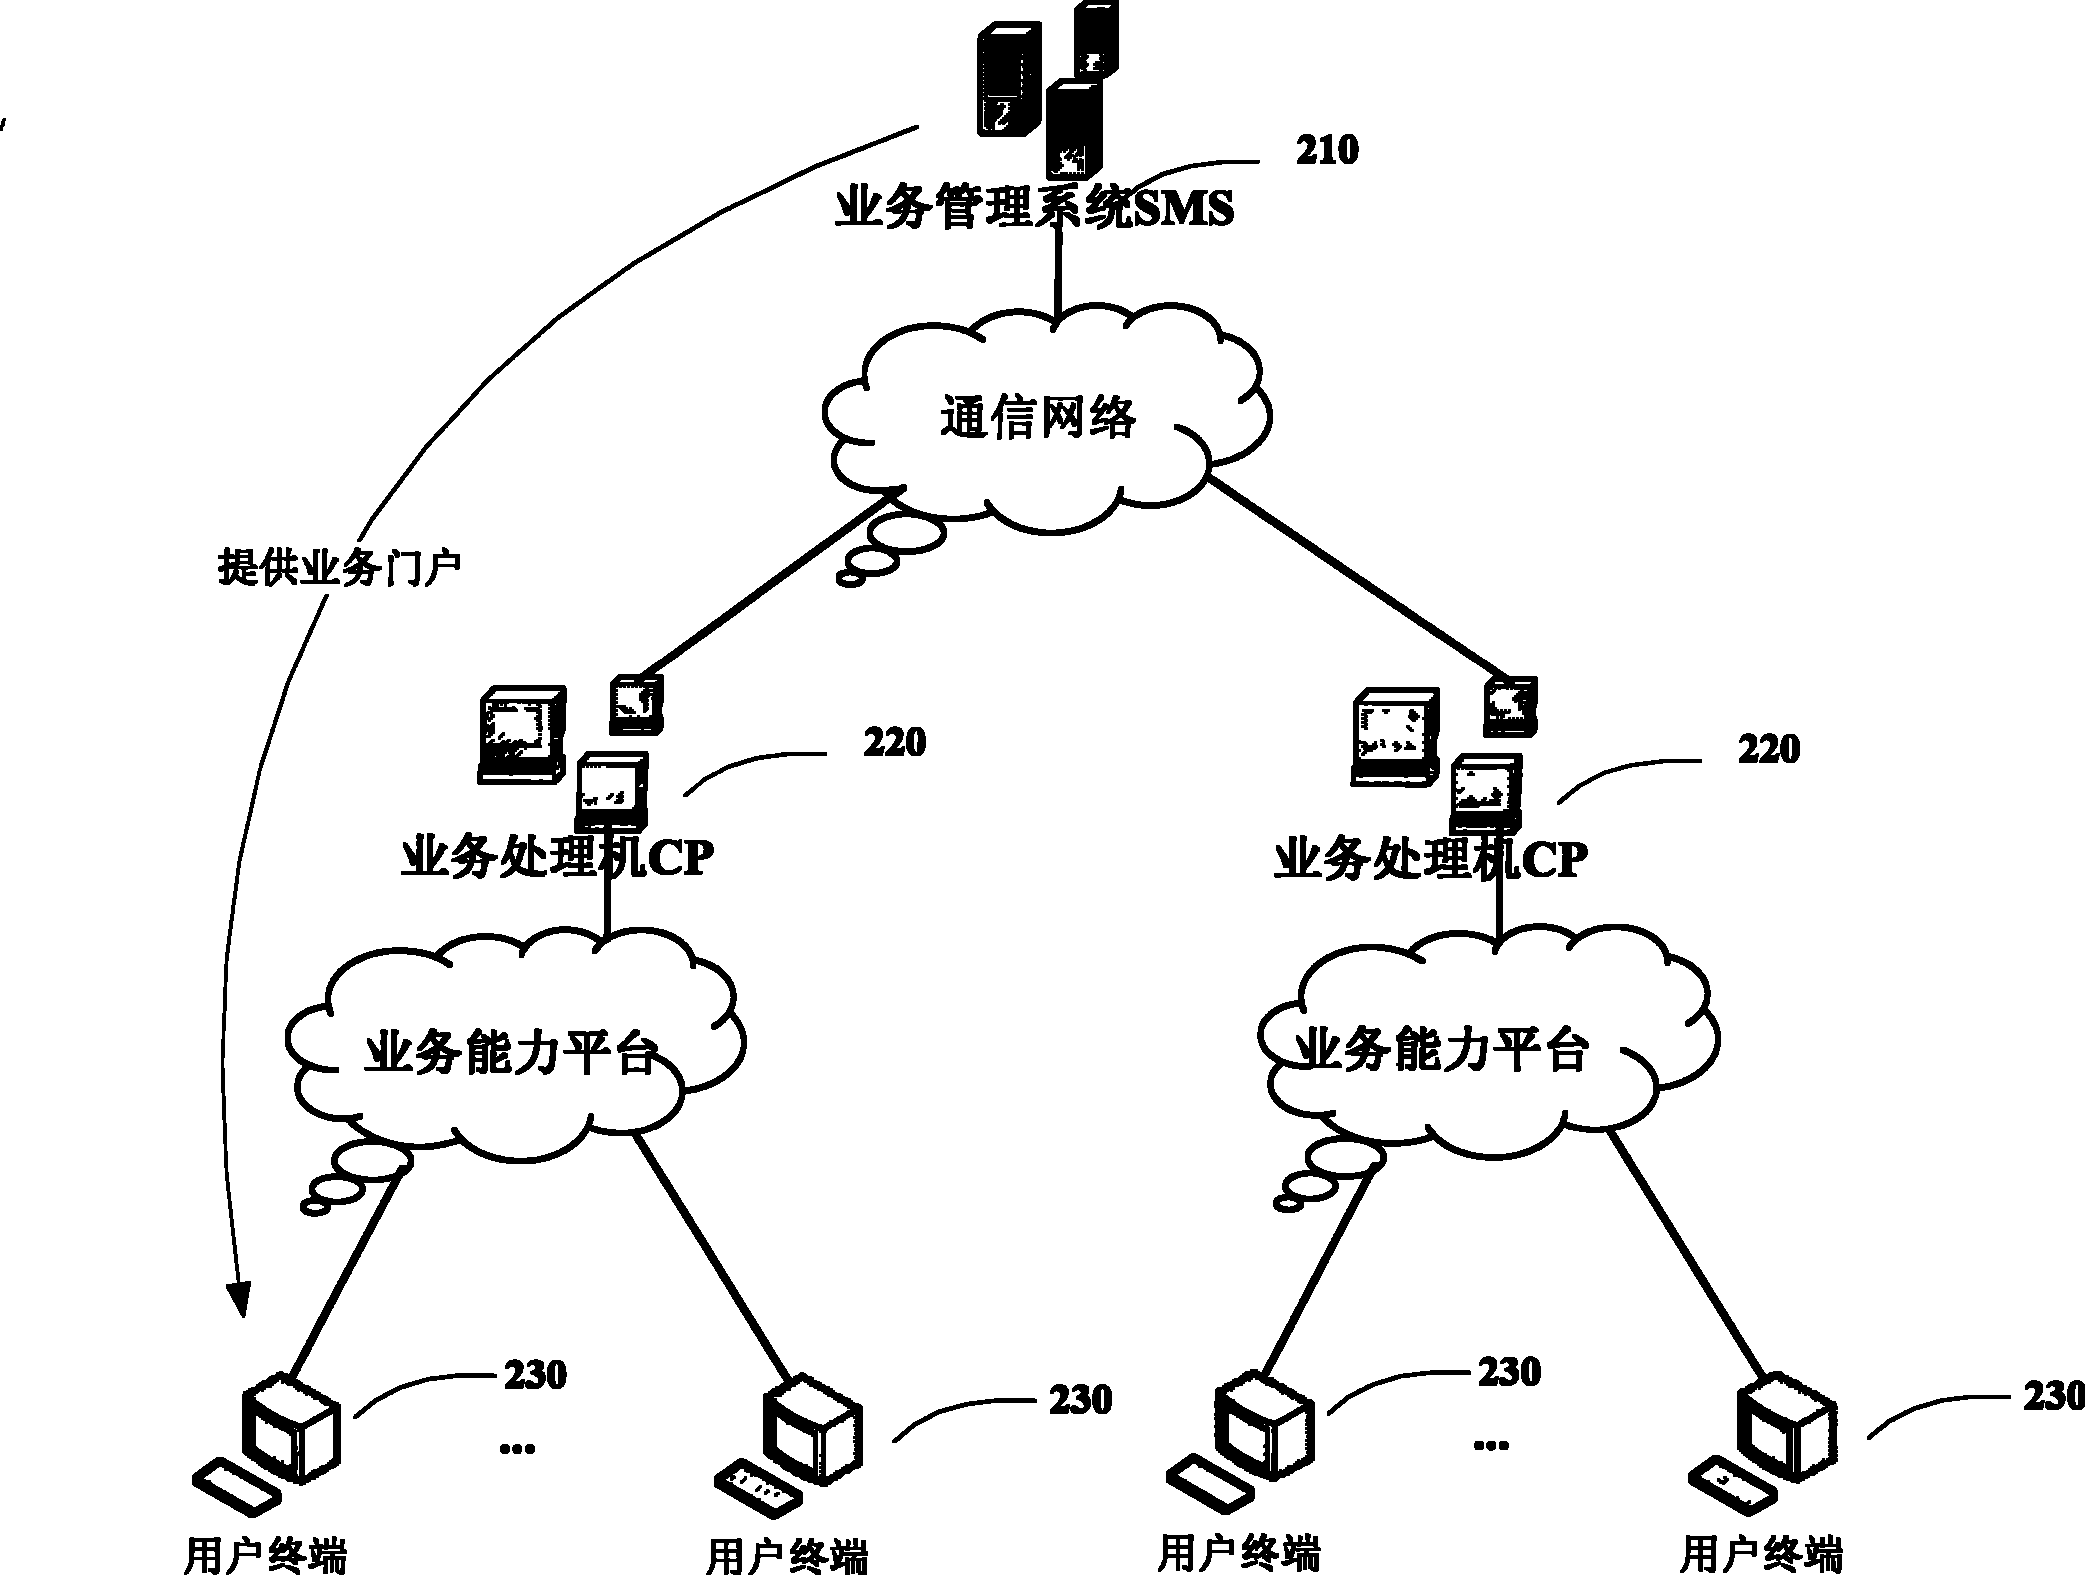 Unified video signal system and method with separated business management and business control